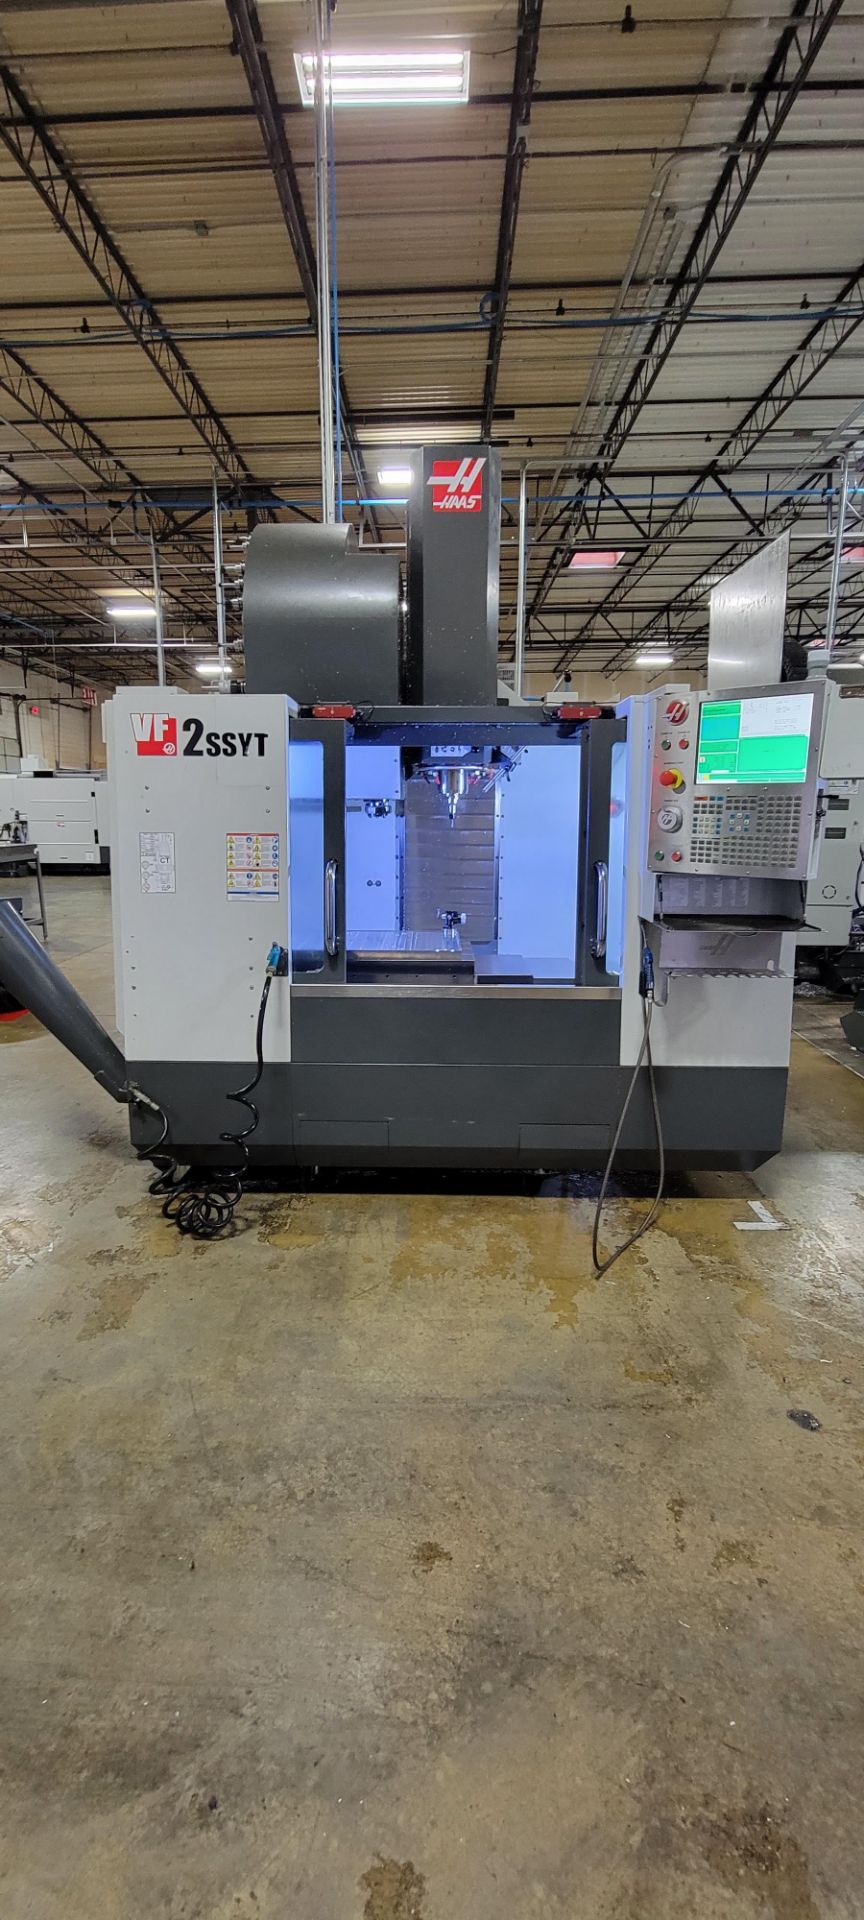 Haas VF-2SSYT 3-Axis CNC Vertical Machining Center - Image 3 of 18